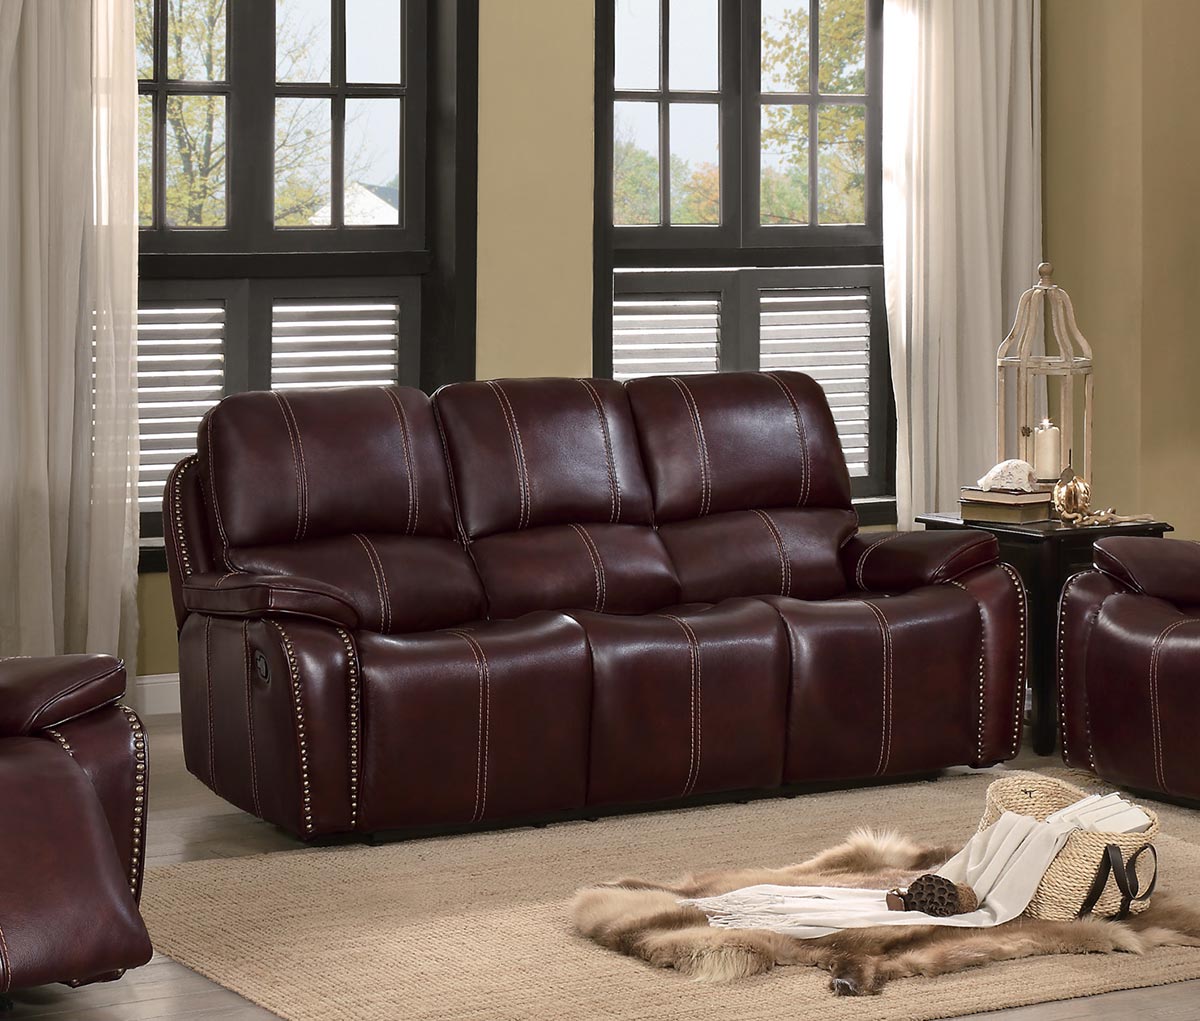 Homelegance Haughton Double Reclining Sofa - Brown Top Grain Leather Match